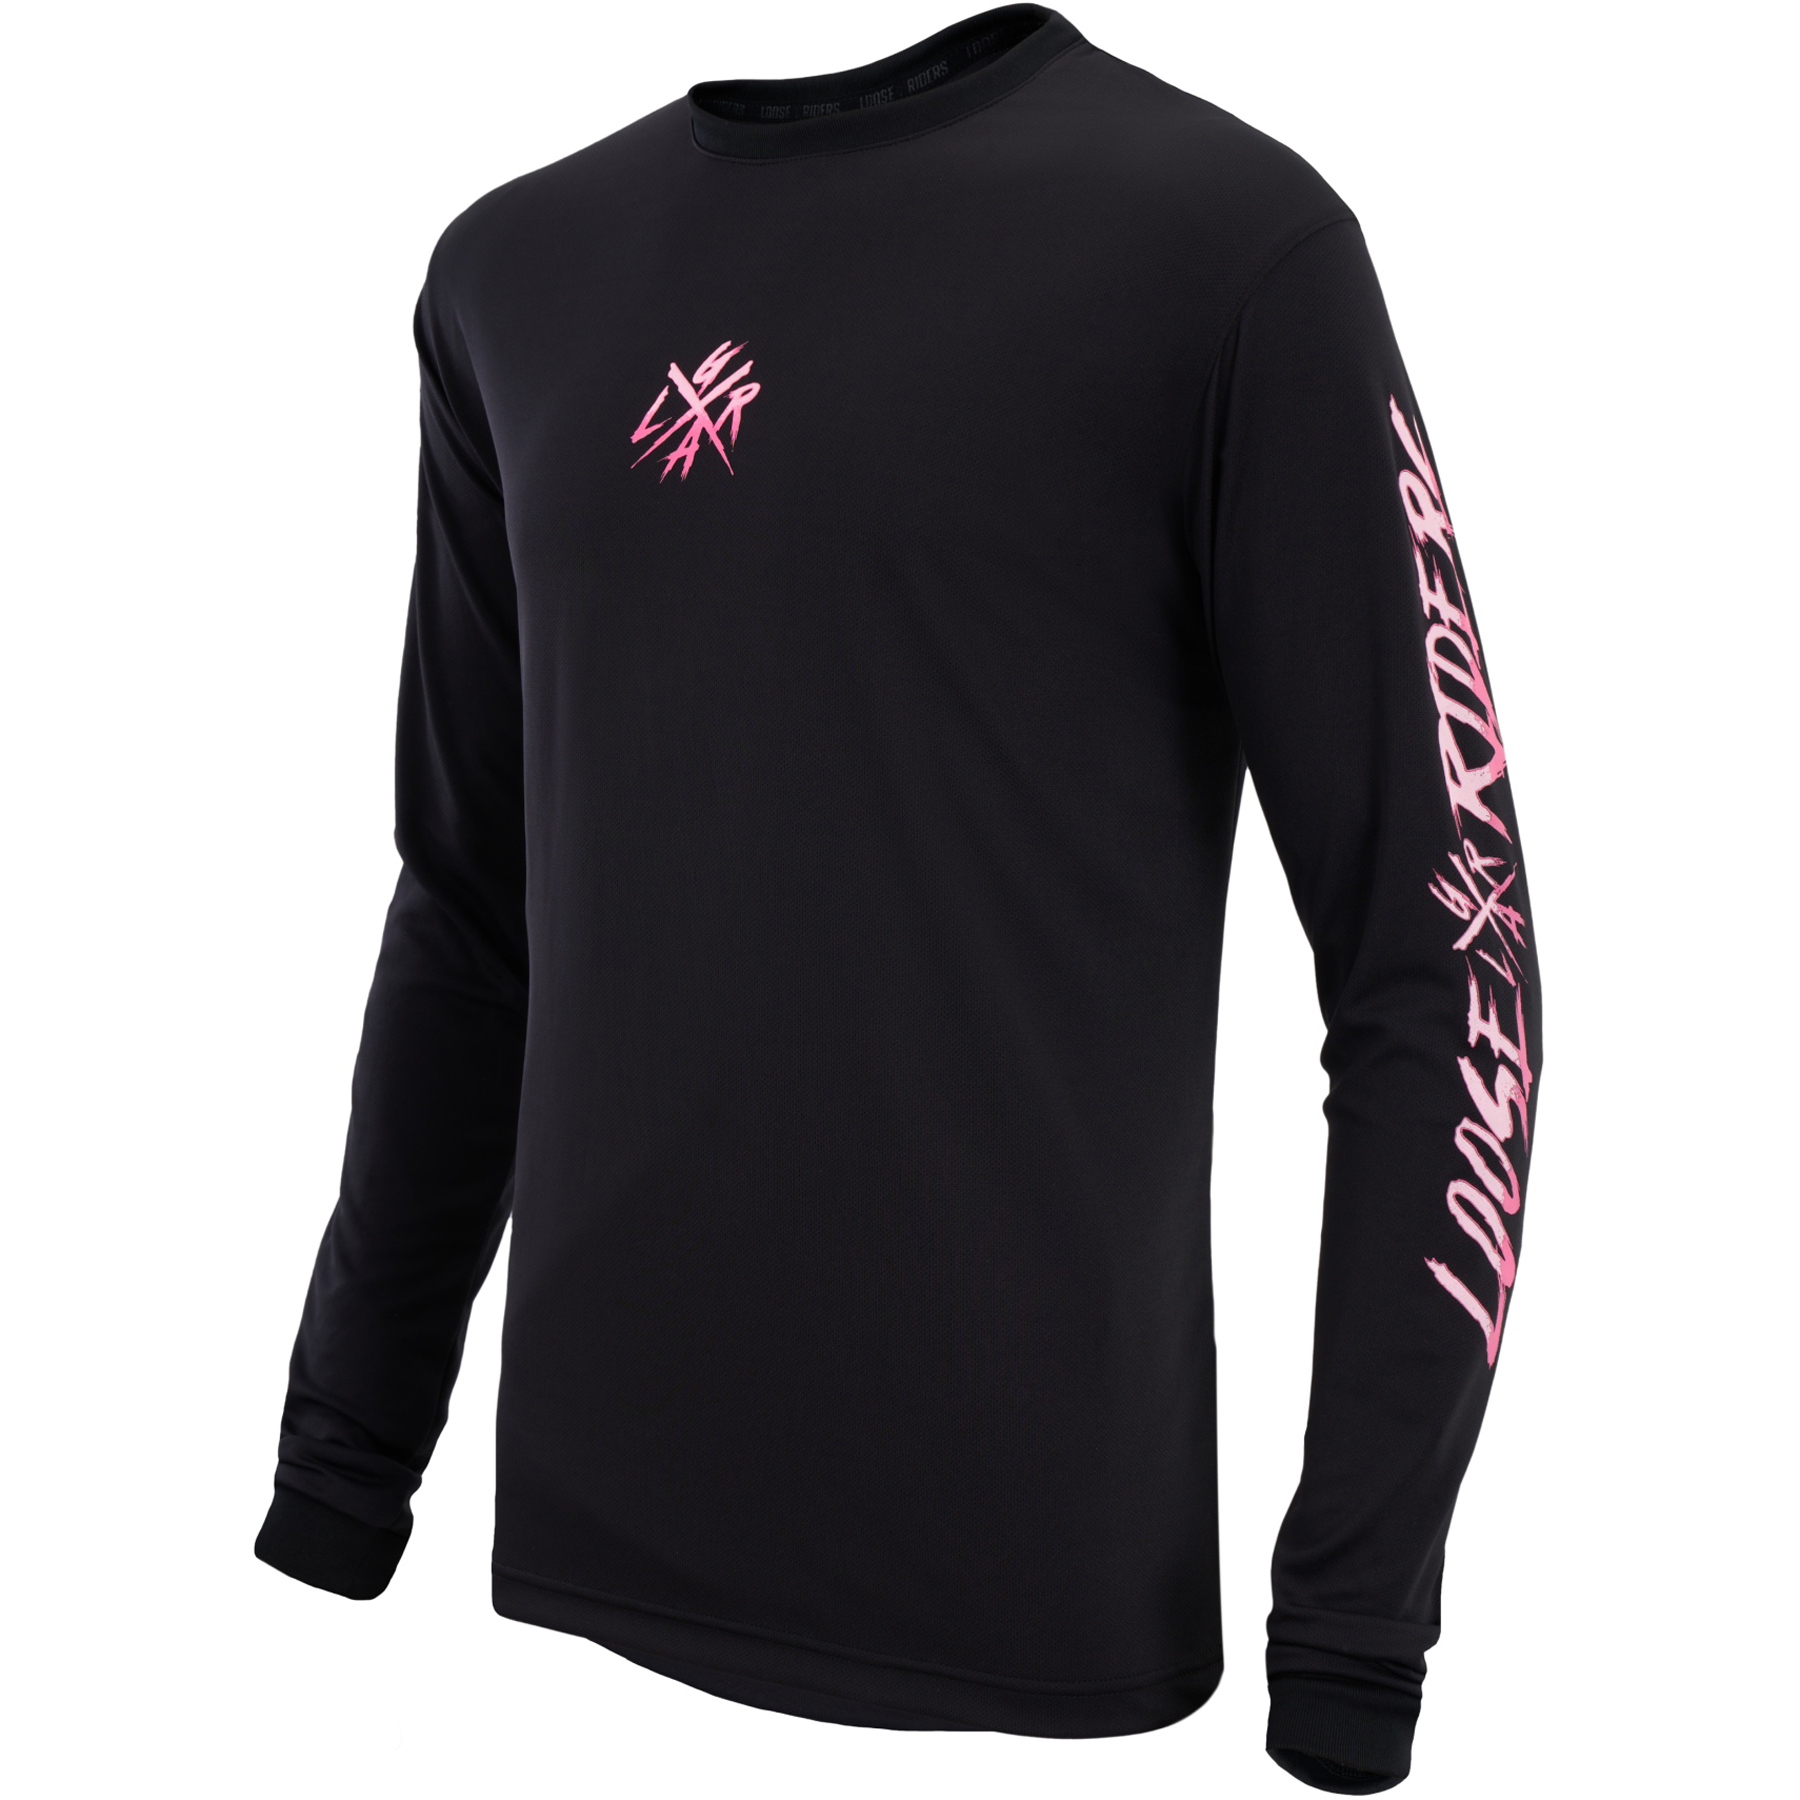 Picture of Loose Riders Cult of Shred Technical Long Sleeve Jersey - The Cult Pink